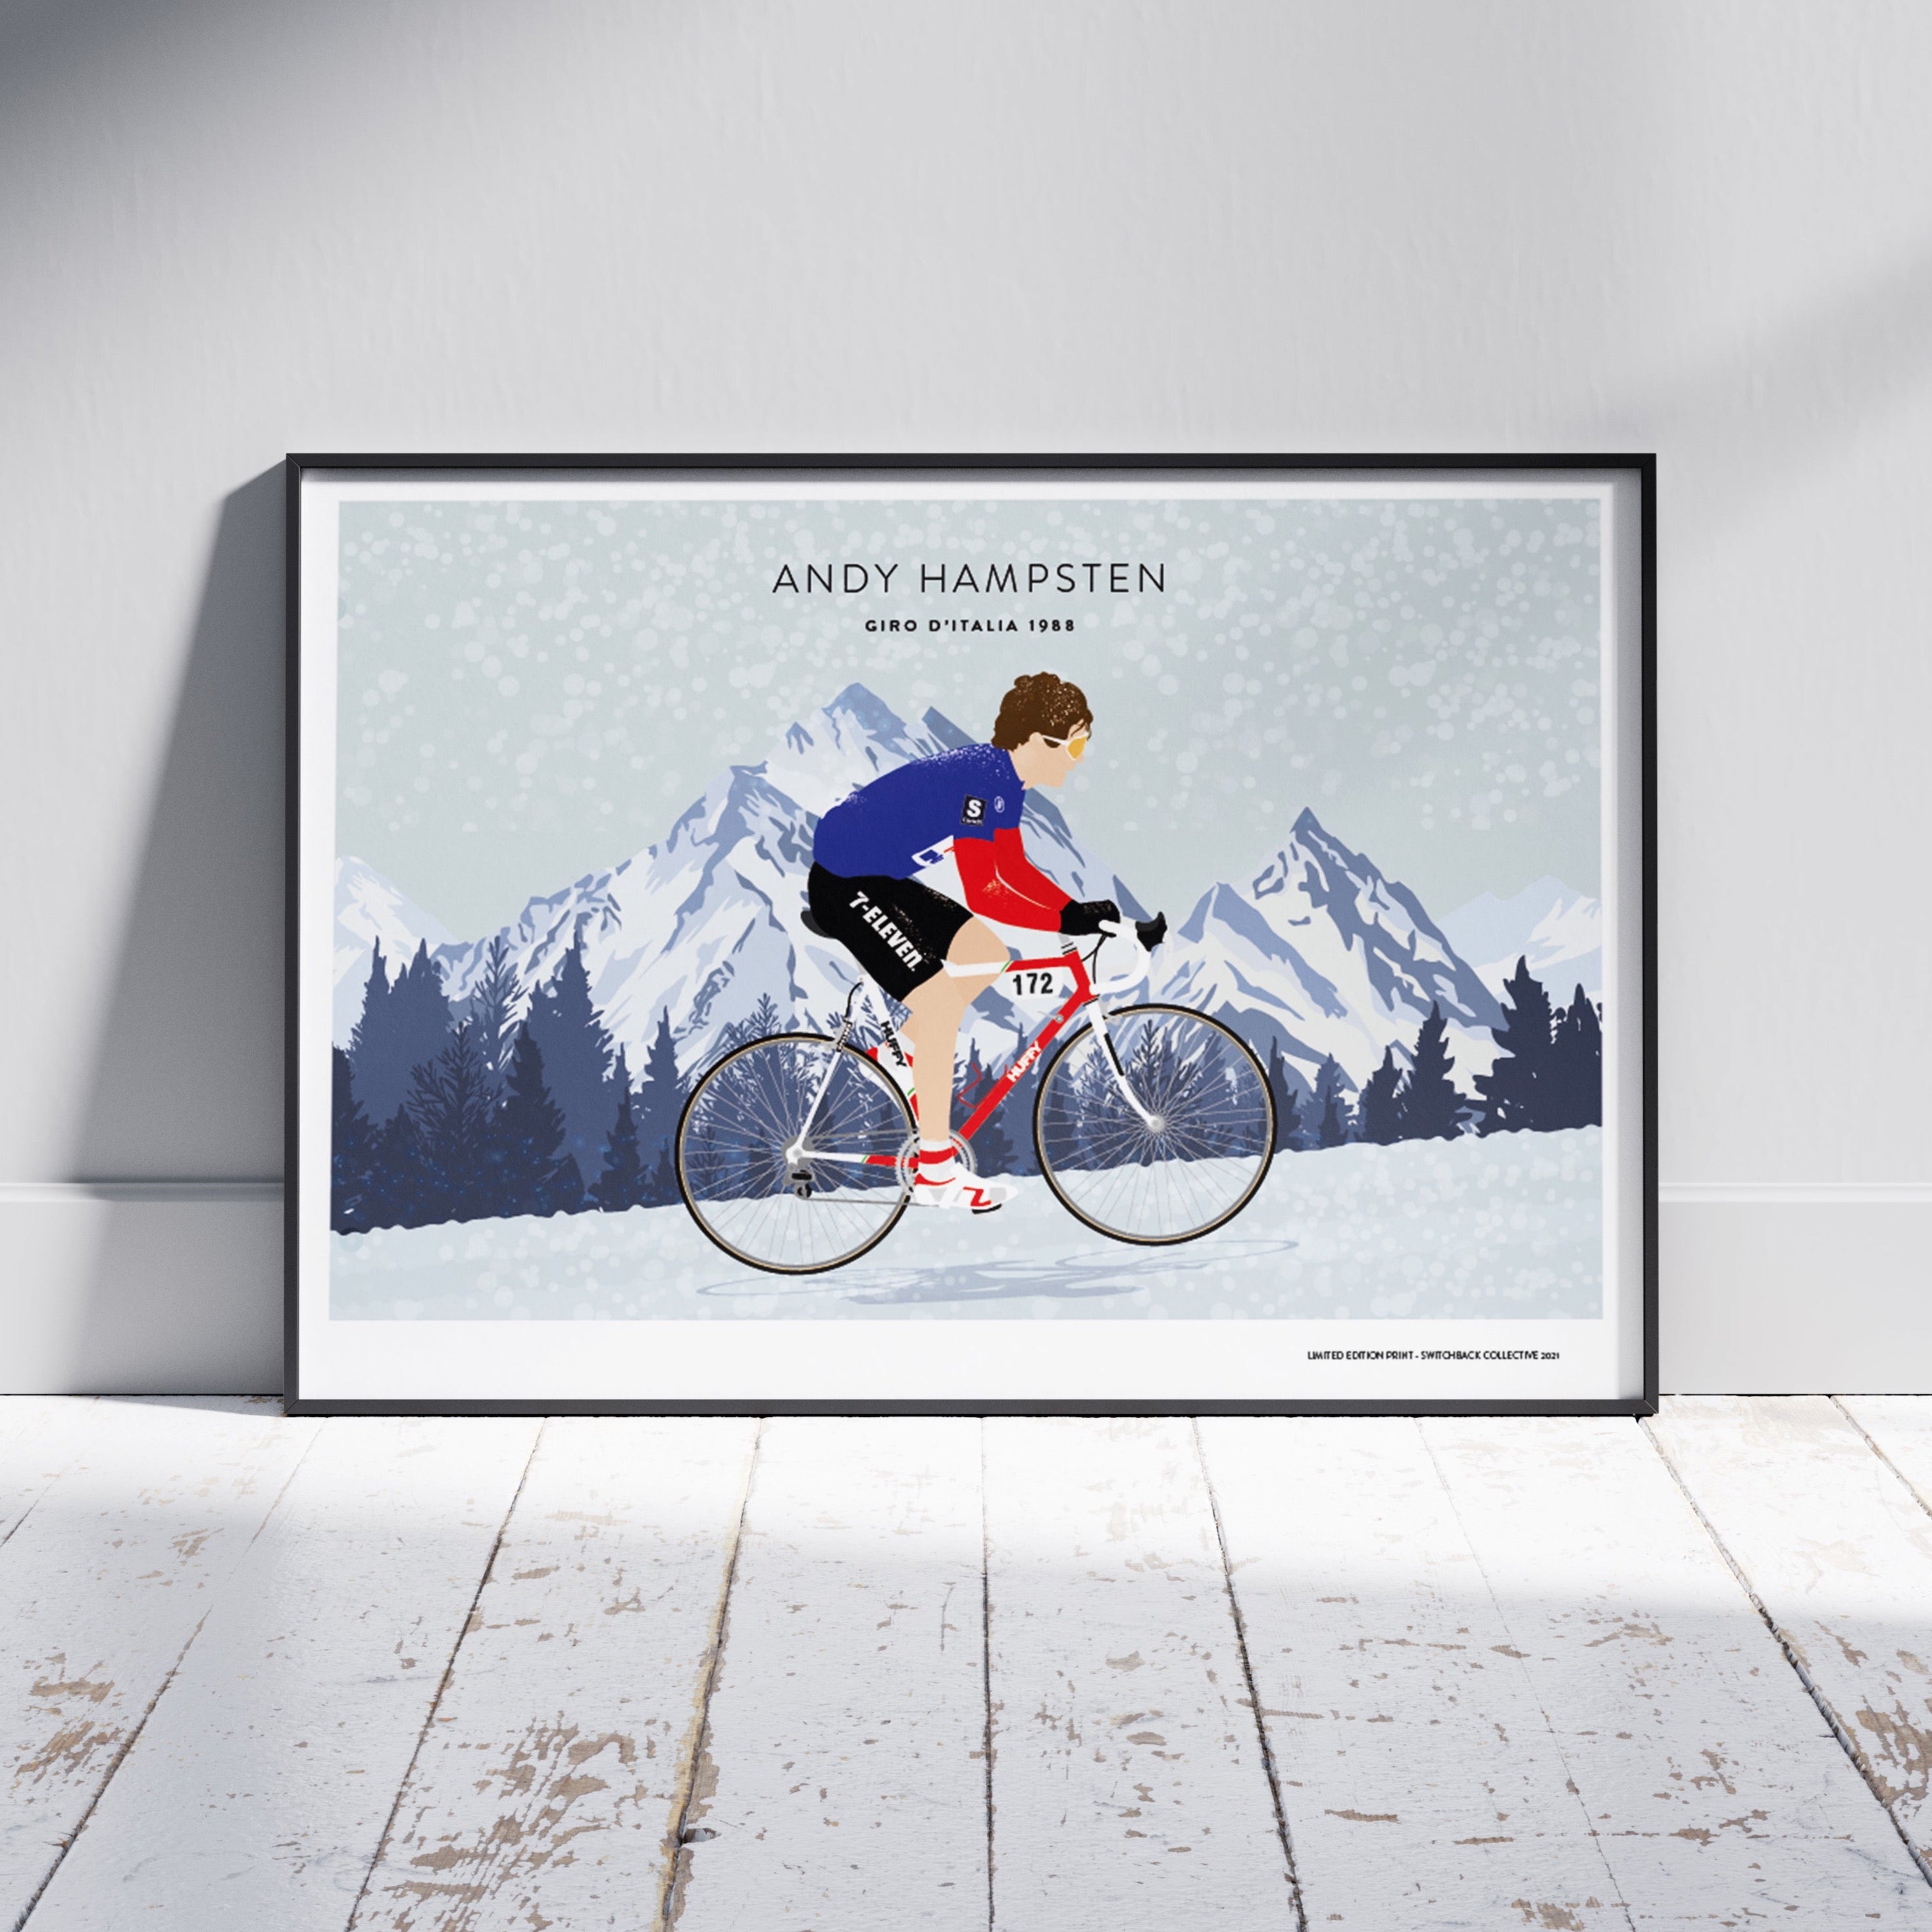 The Ascent, Andy Hampsten - Giro d'Italia 1988 - Limited Edition Print